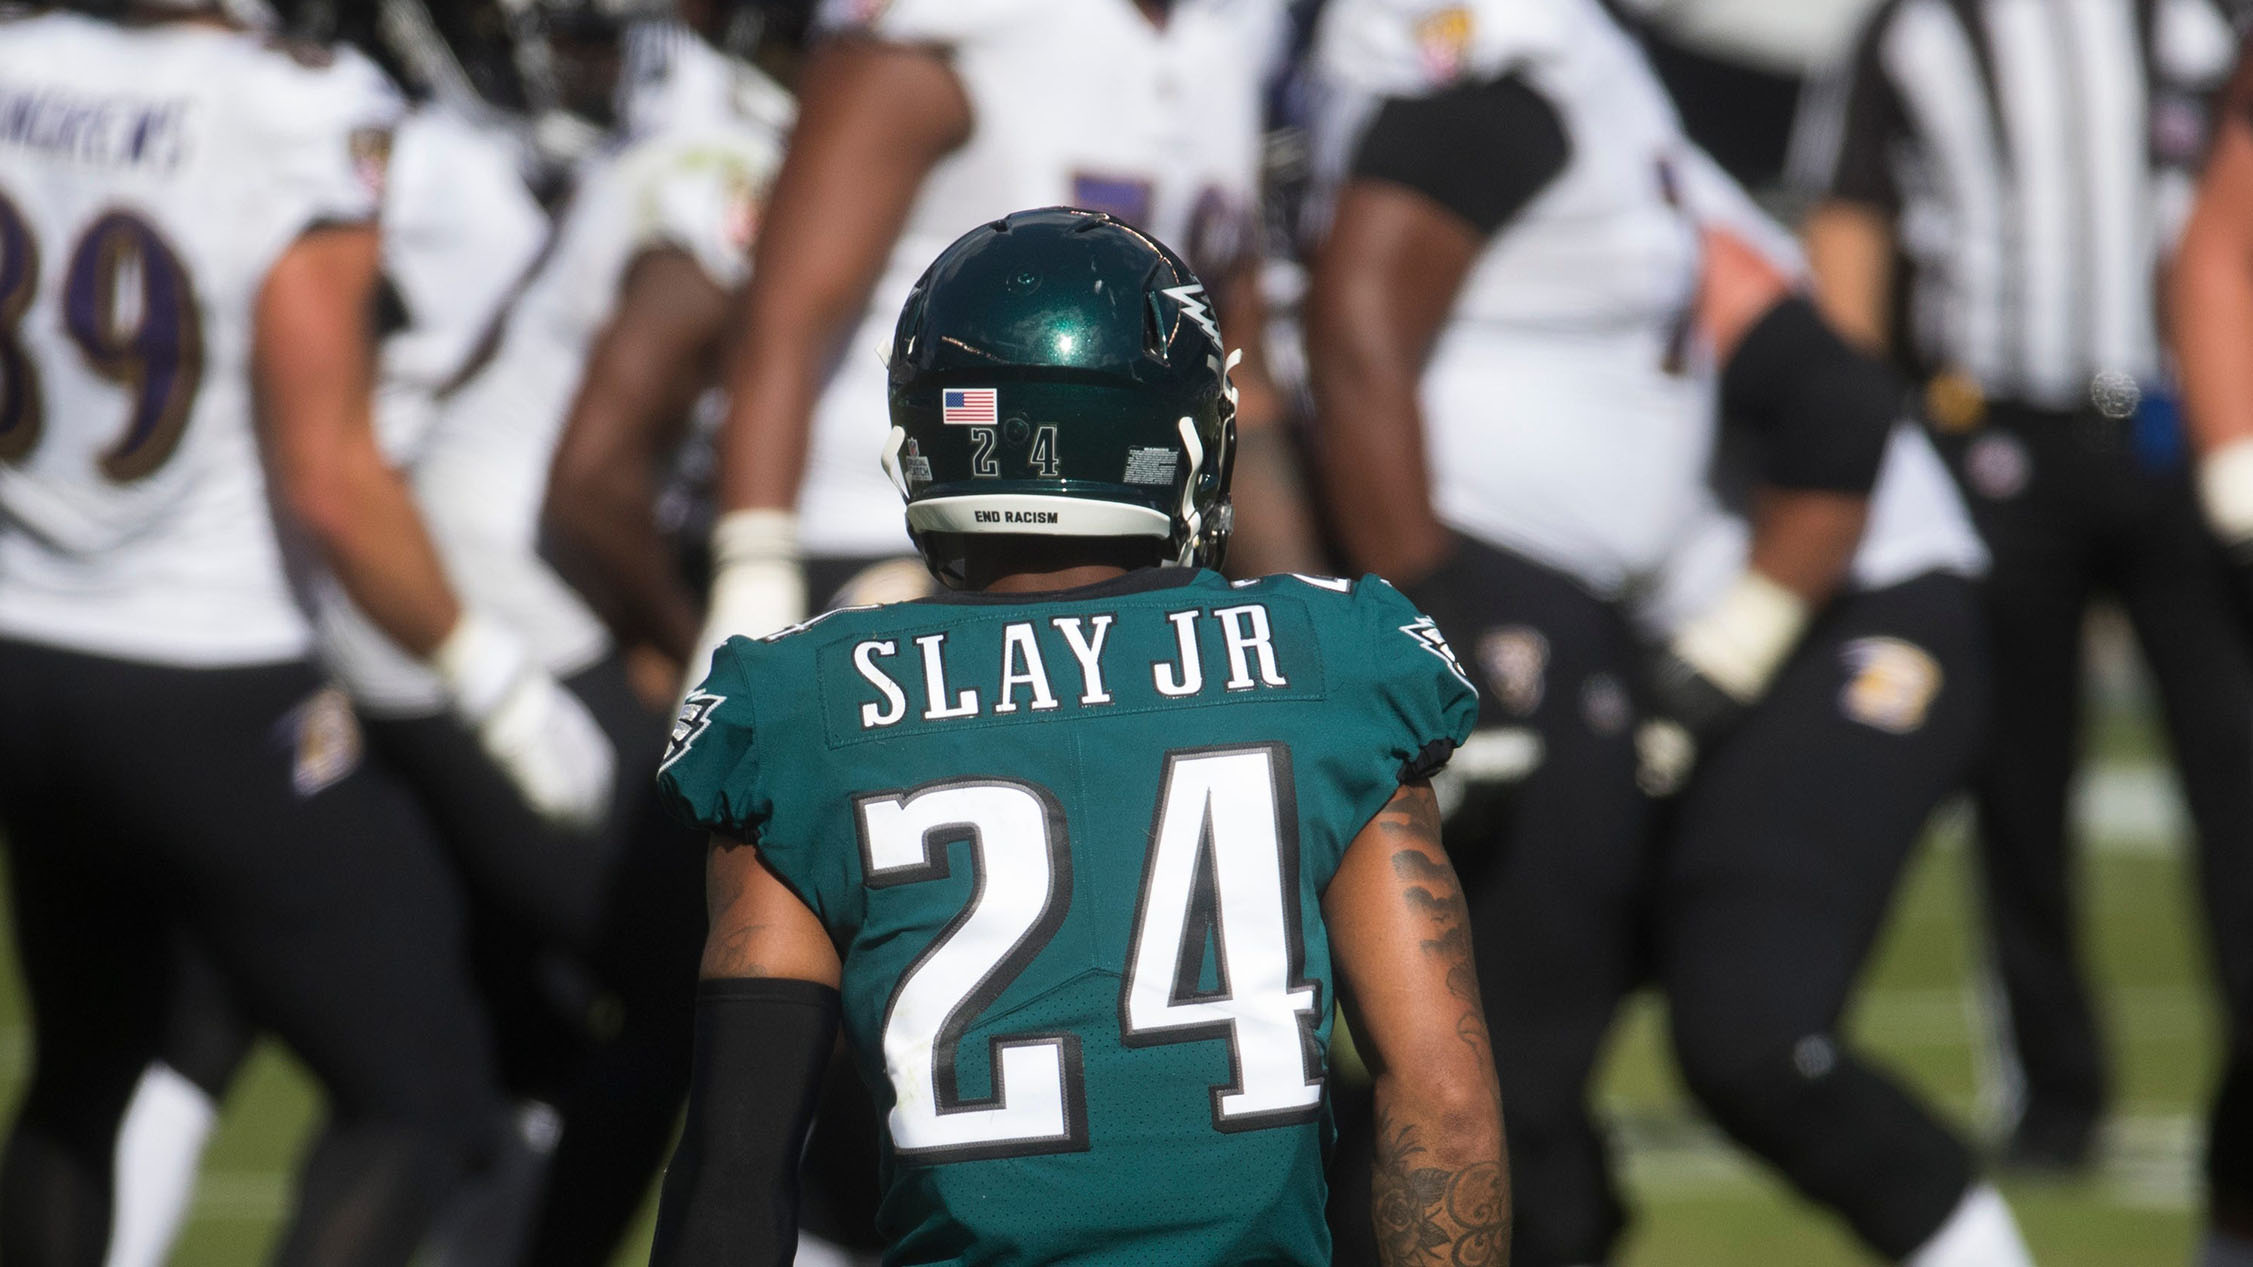 NFL jersey numbers 2021: Live updates on Eagles number changes